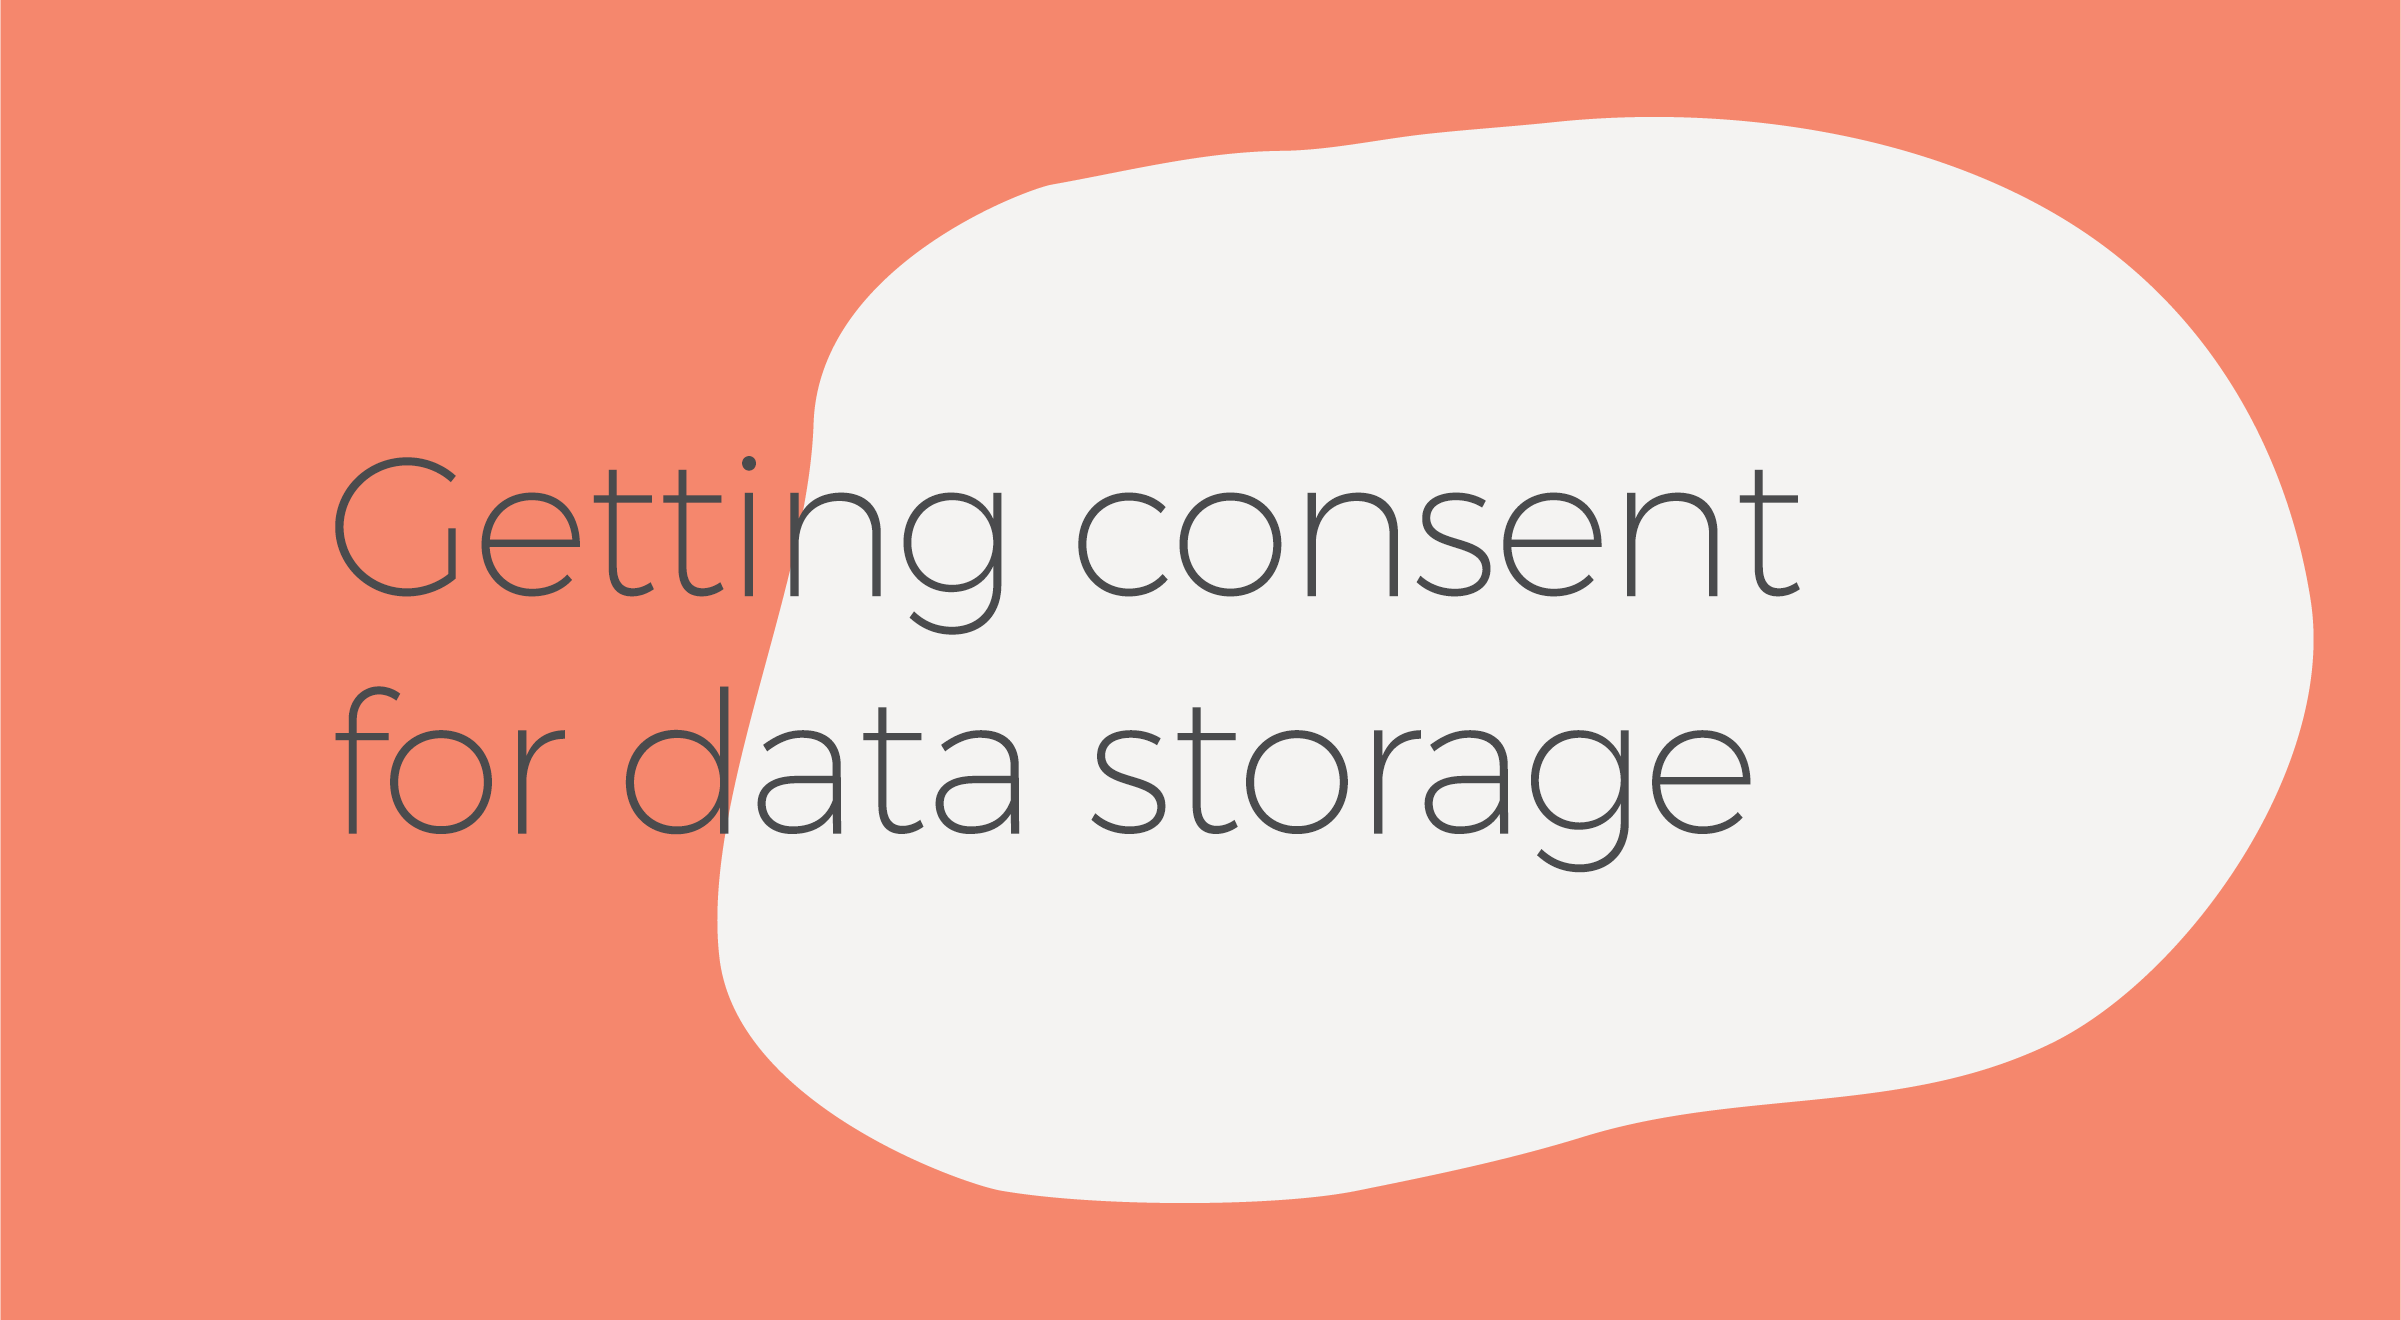 Getting consent for data storage